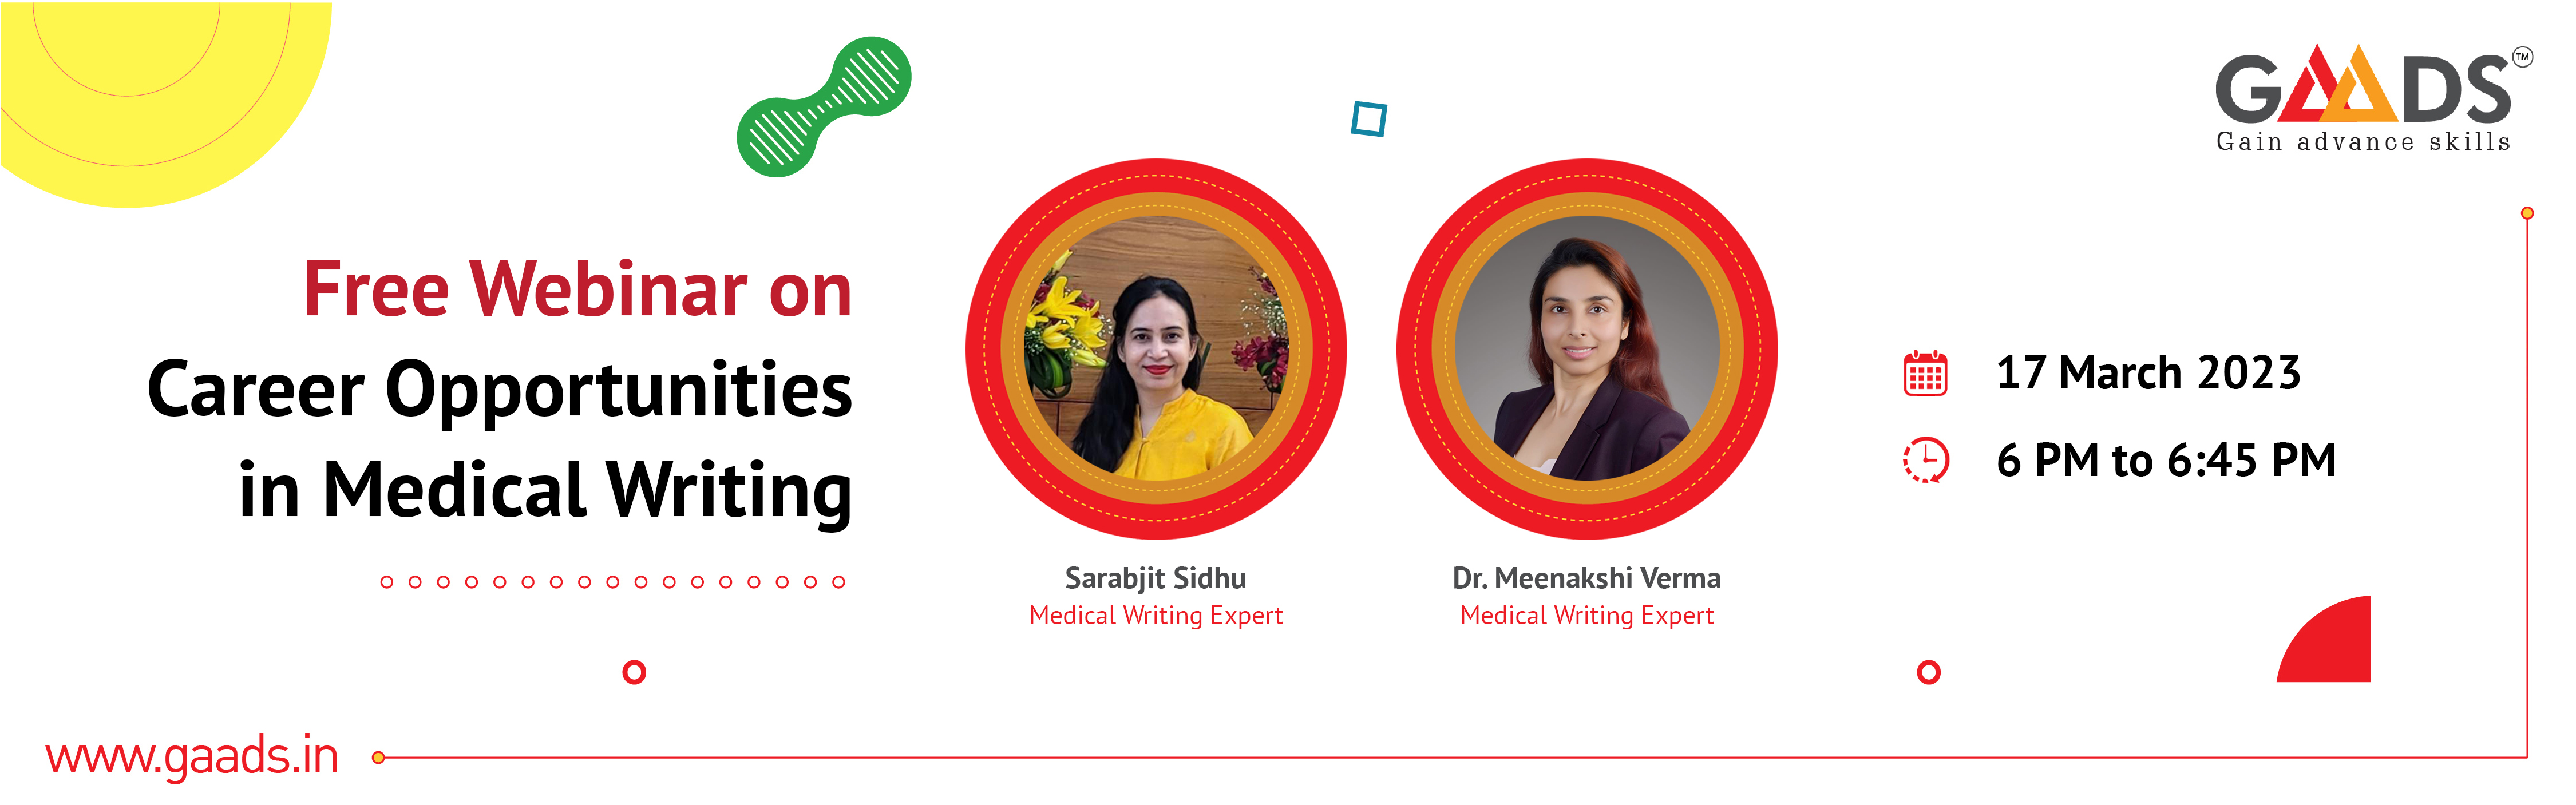 Join us for a Free Webinar on Career Opportunities in Medical Writing, Online Event